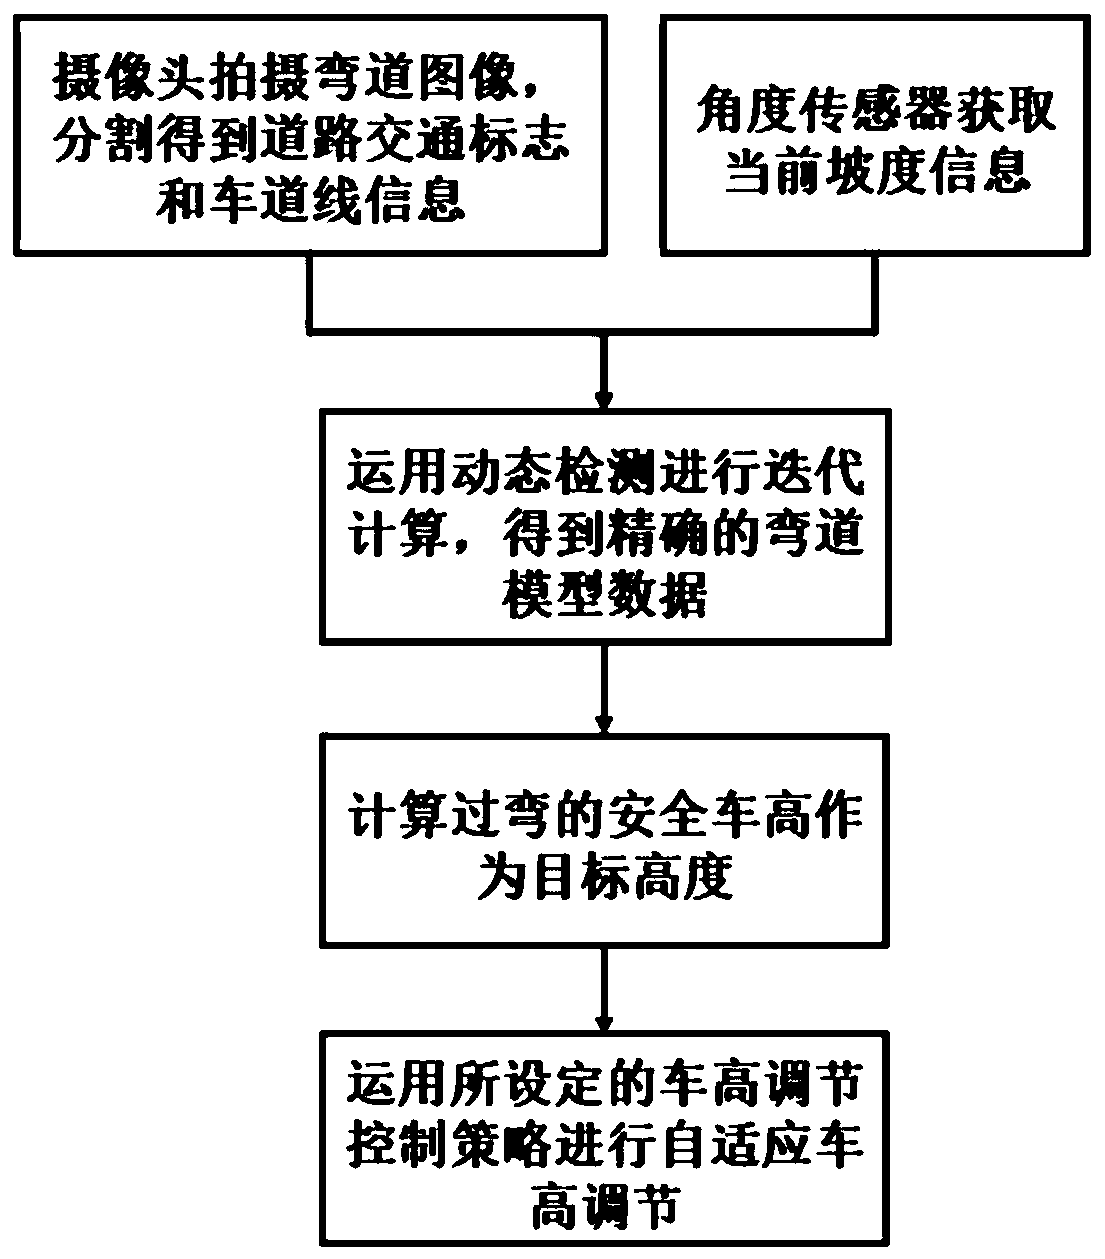 Curve identification and car height adjusting method for electronic-controlled air suspension (ECAS) system